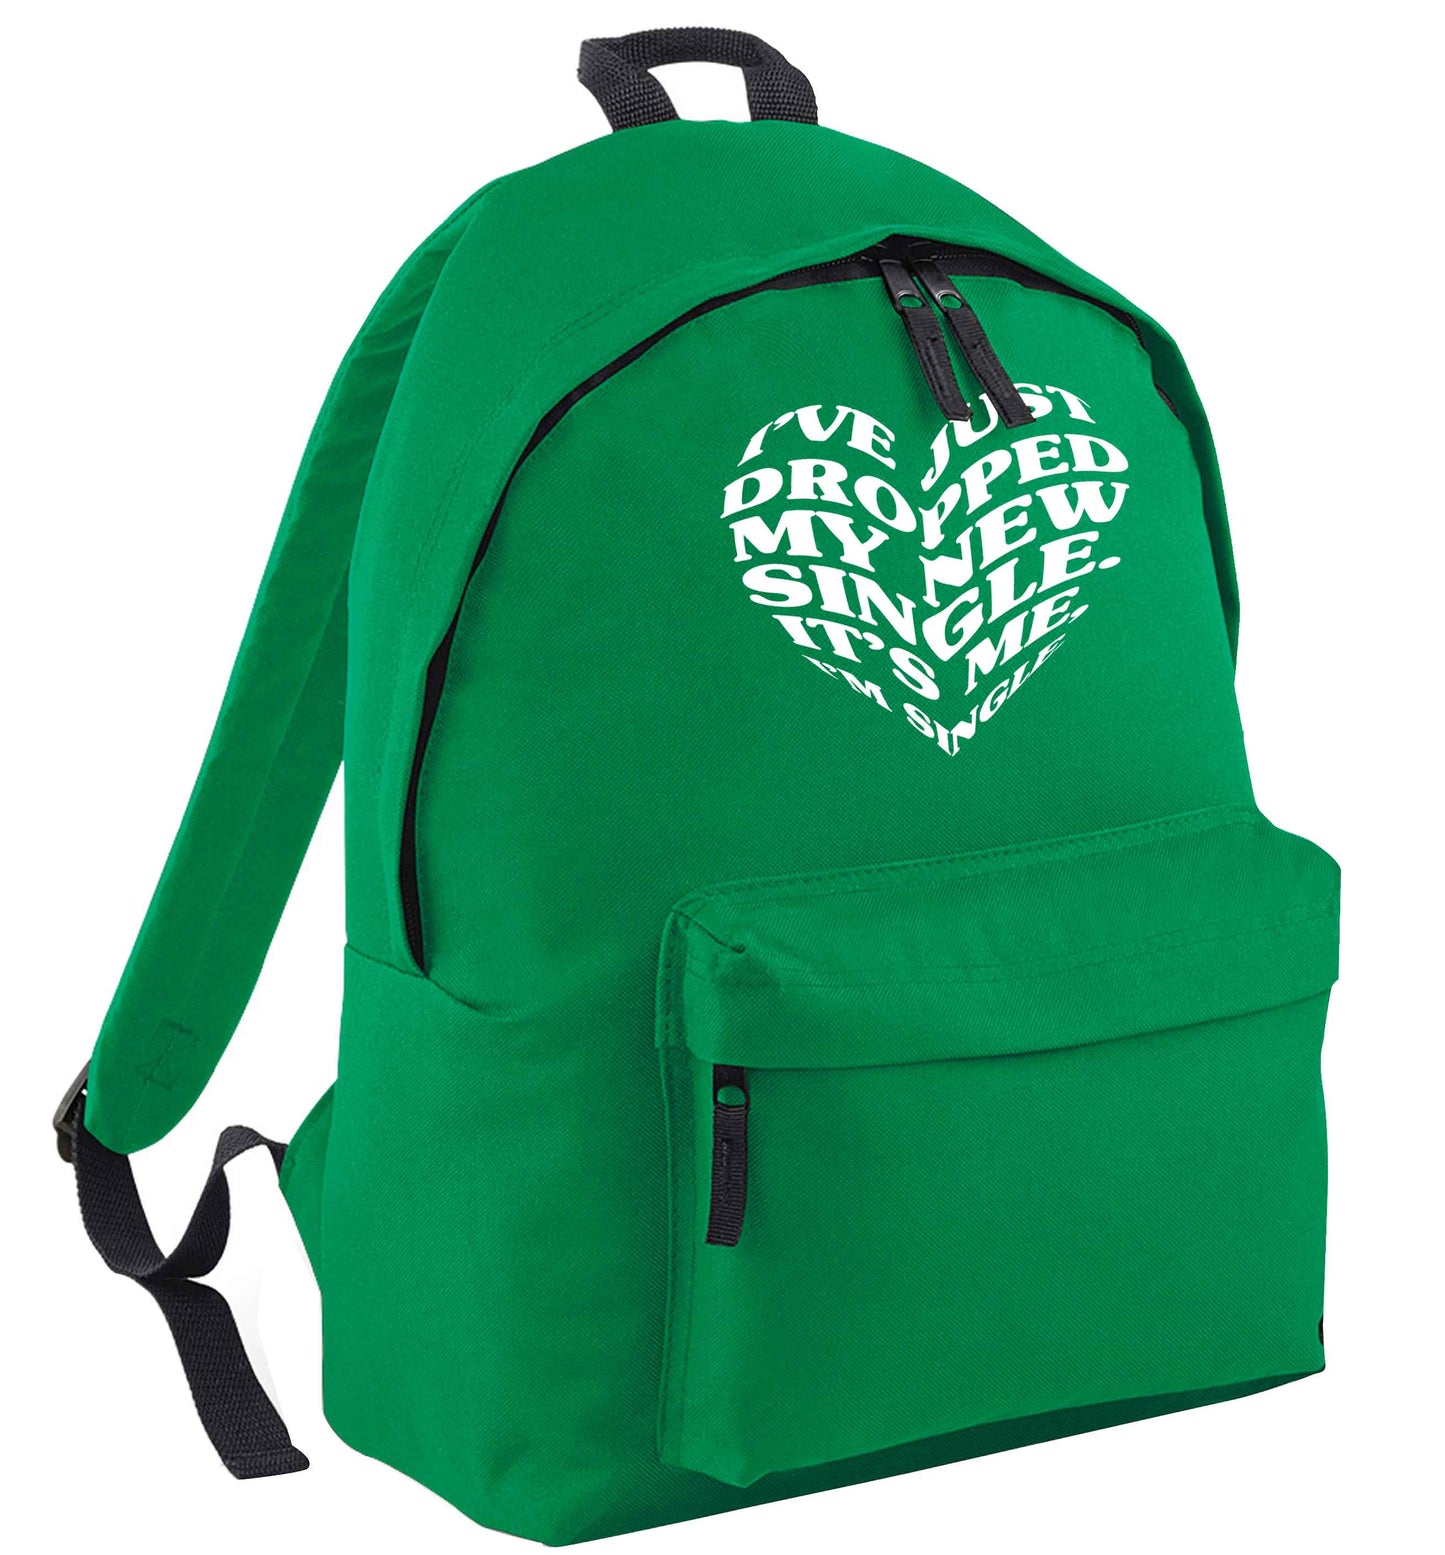 I've just dropped my new single it's me I'm single green adults backpack